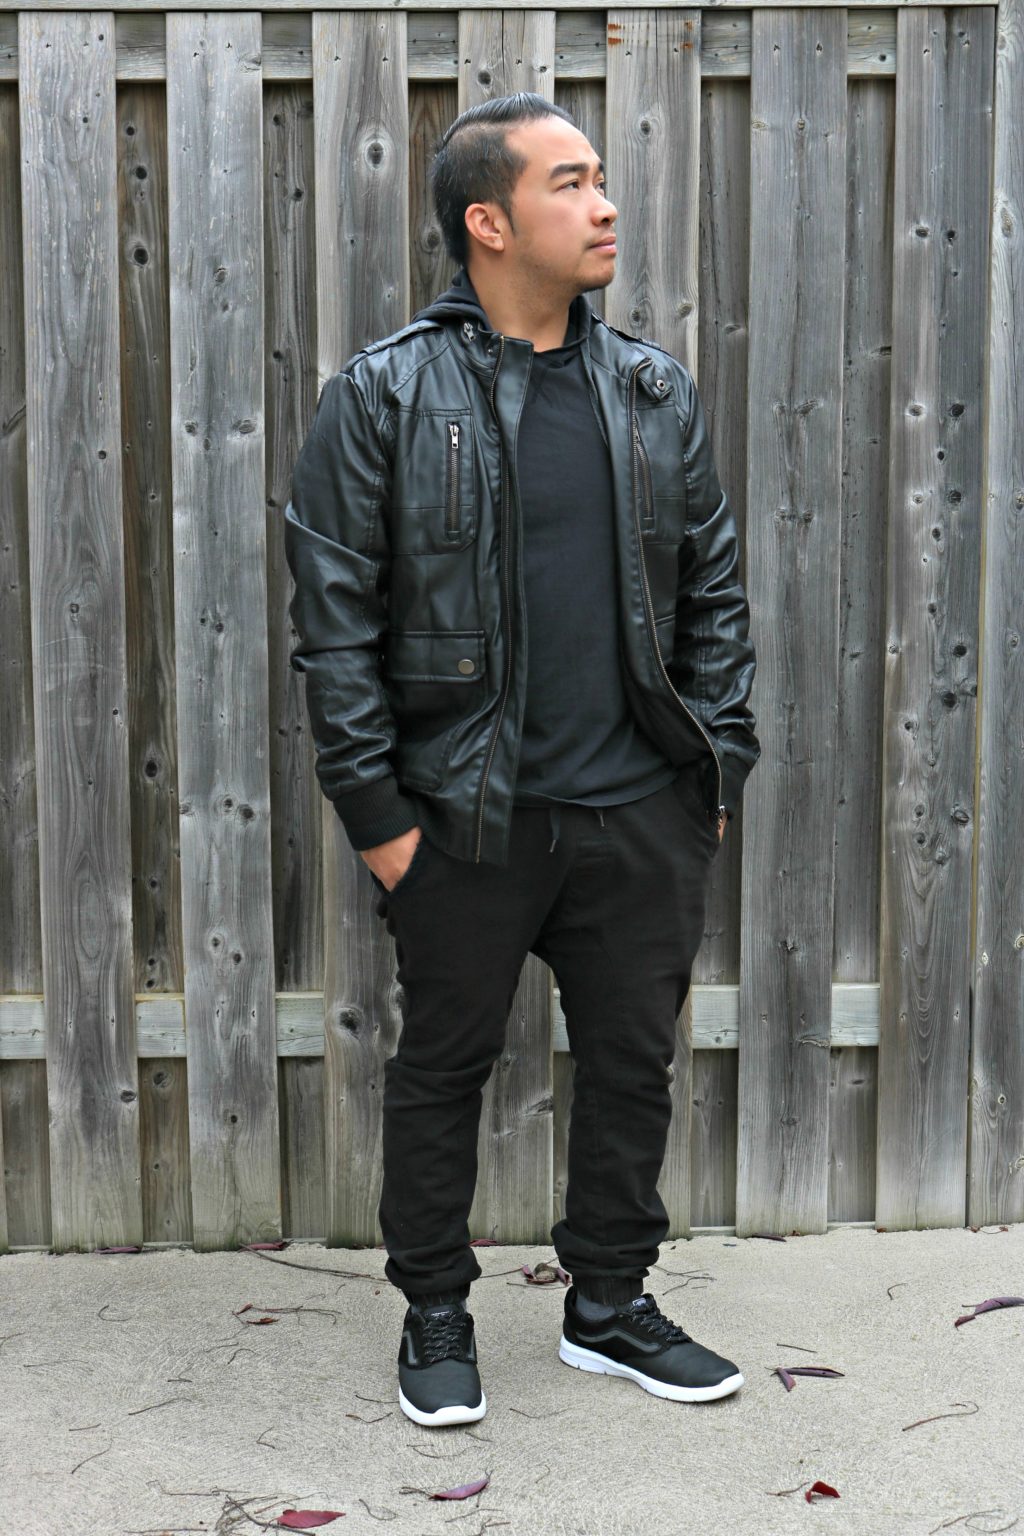 Darasak stands and shows off his outfit, all monochrome black with Vans.